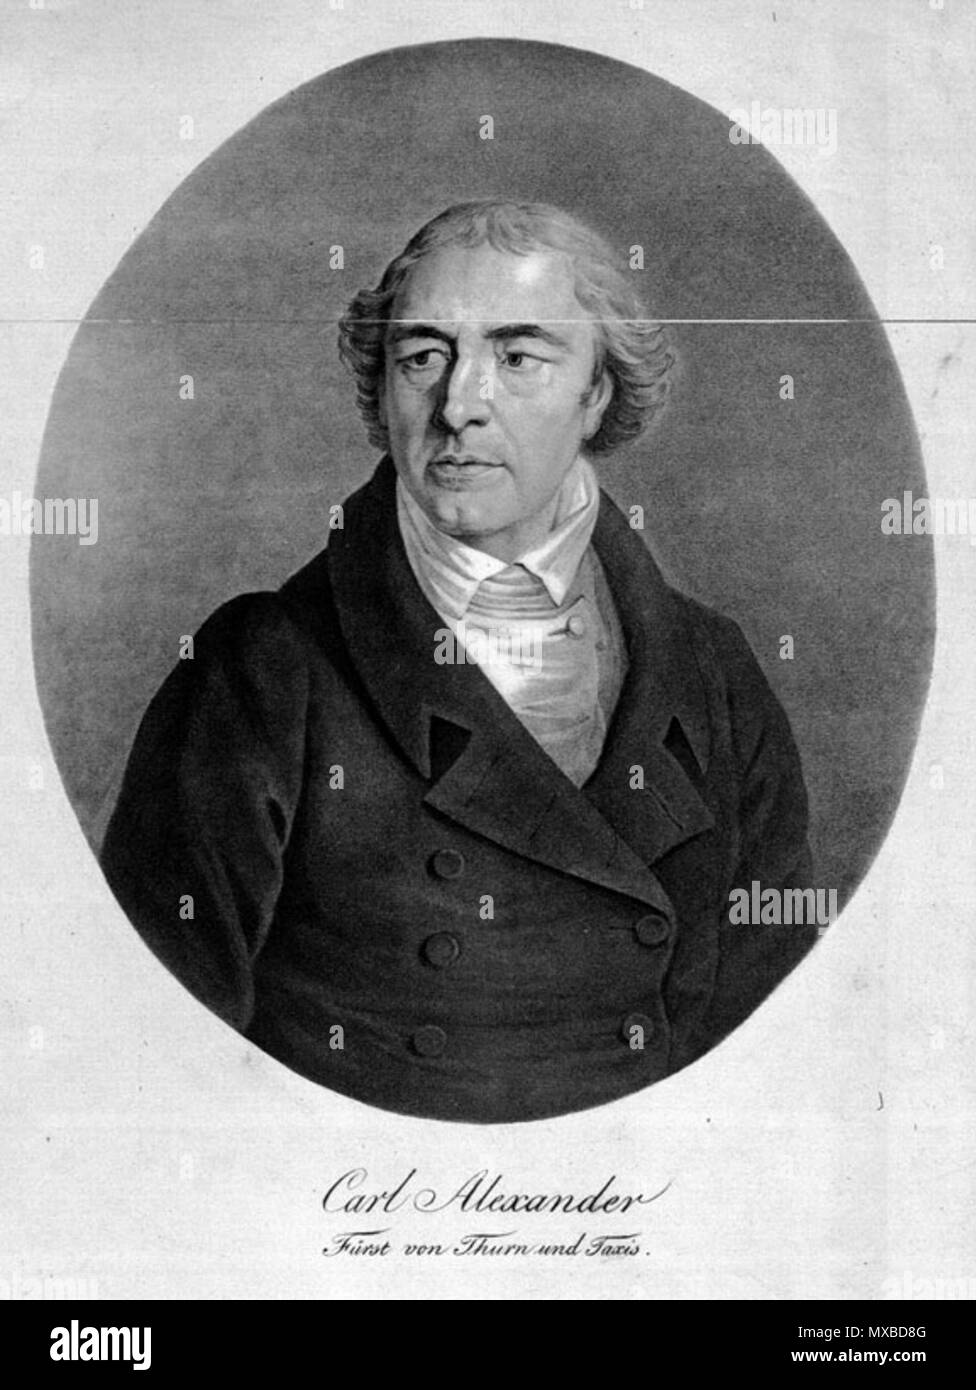 . Karl Alexander von Thurn und Taxis (1805 - 1827) . Commons upload by Michael Romanov 18:20, 25 July 2007. User Känsterle on nl.wikipedia 338 KAvTuT Stock Photo